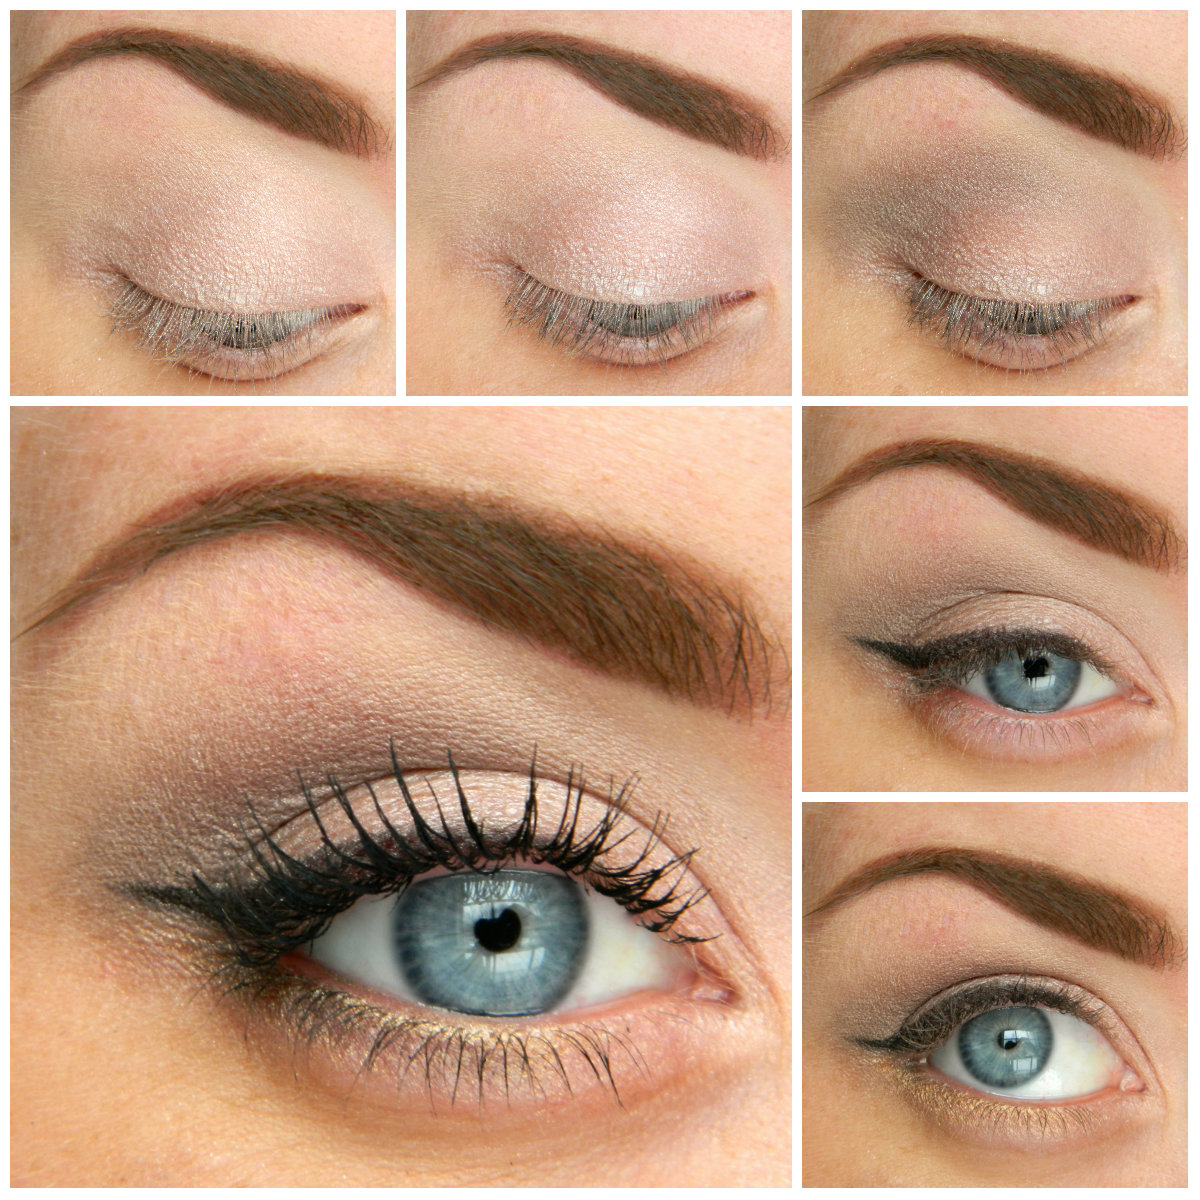 Makeup To Make Blue Eyes Pop 5 Ways To Make Blue Eyes Pop With Proper Eye Makeup Her Style Code